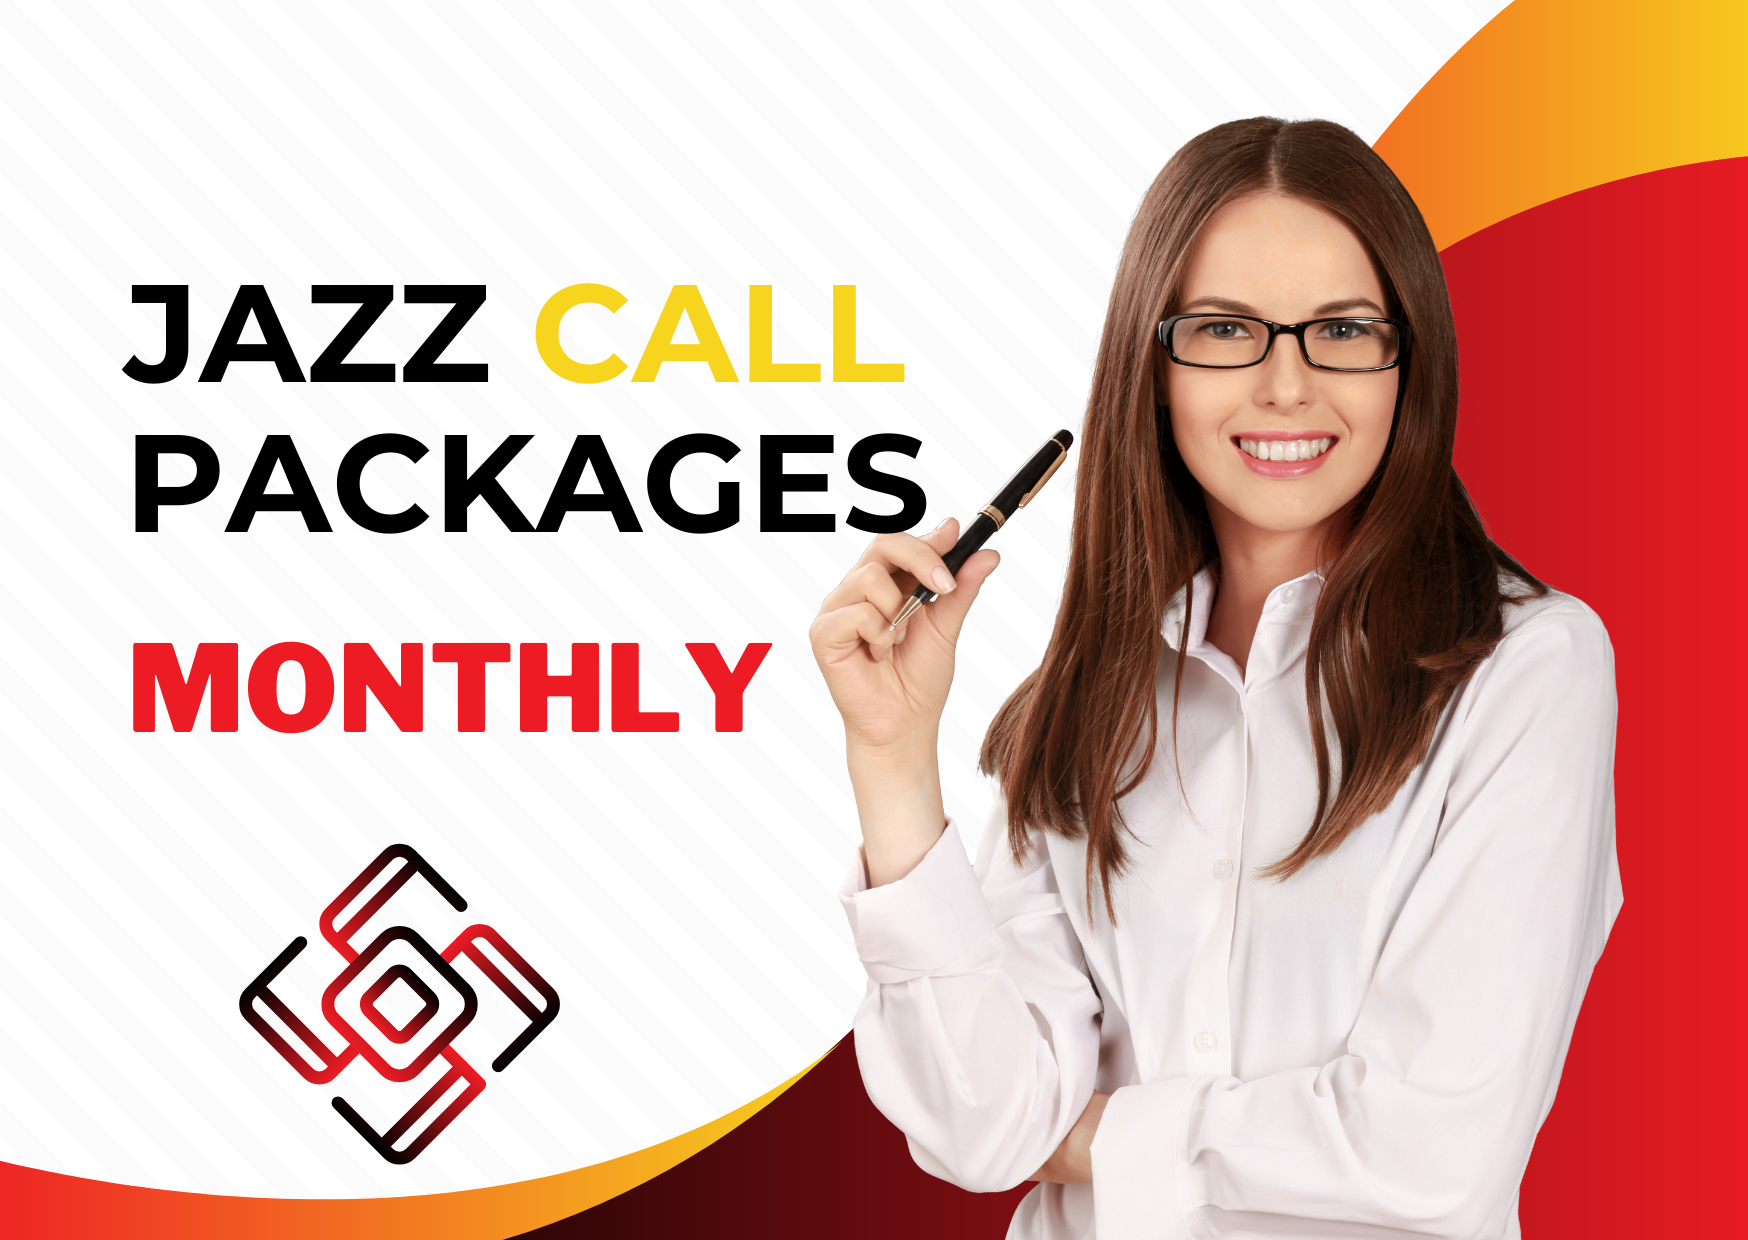 jazz call packages monthly